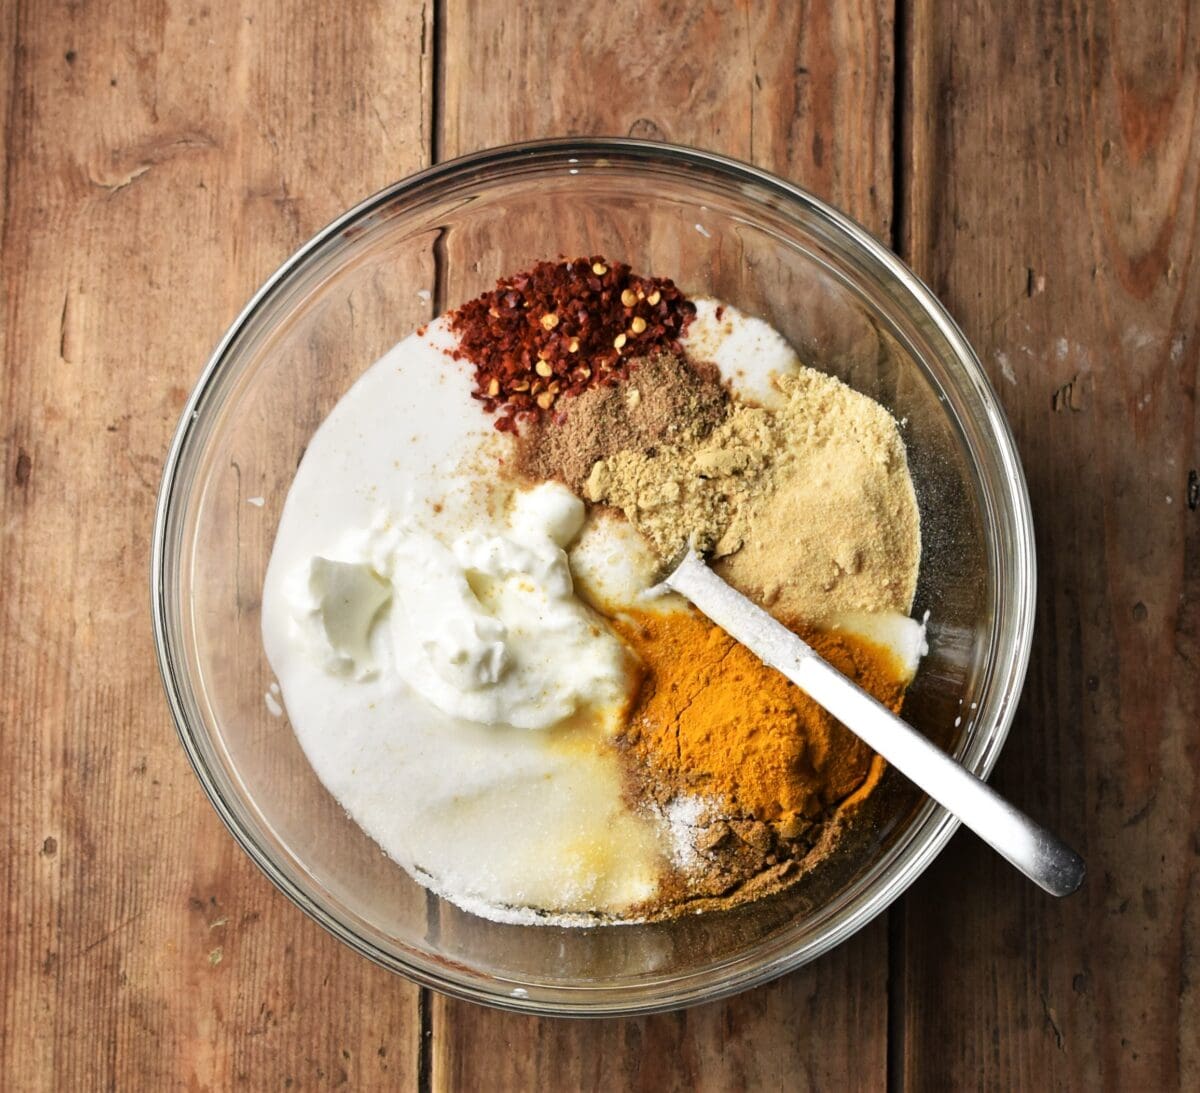 Yogurt and spices in mixing bowl with spoon.